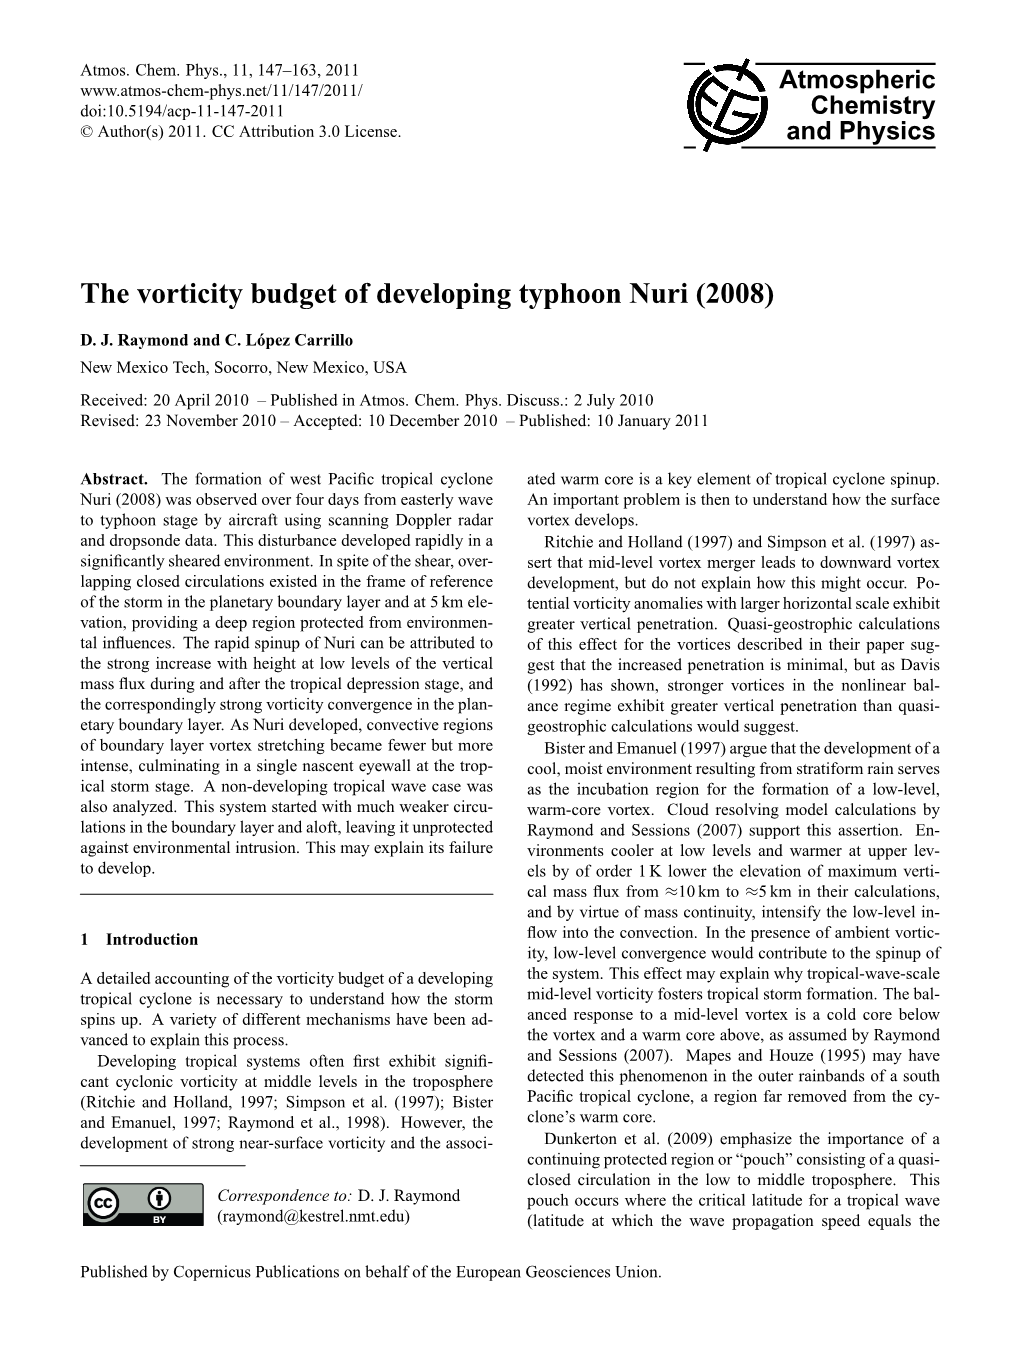 The Vorticity Budget of Developing Typhoon Nuri (2008)